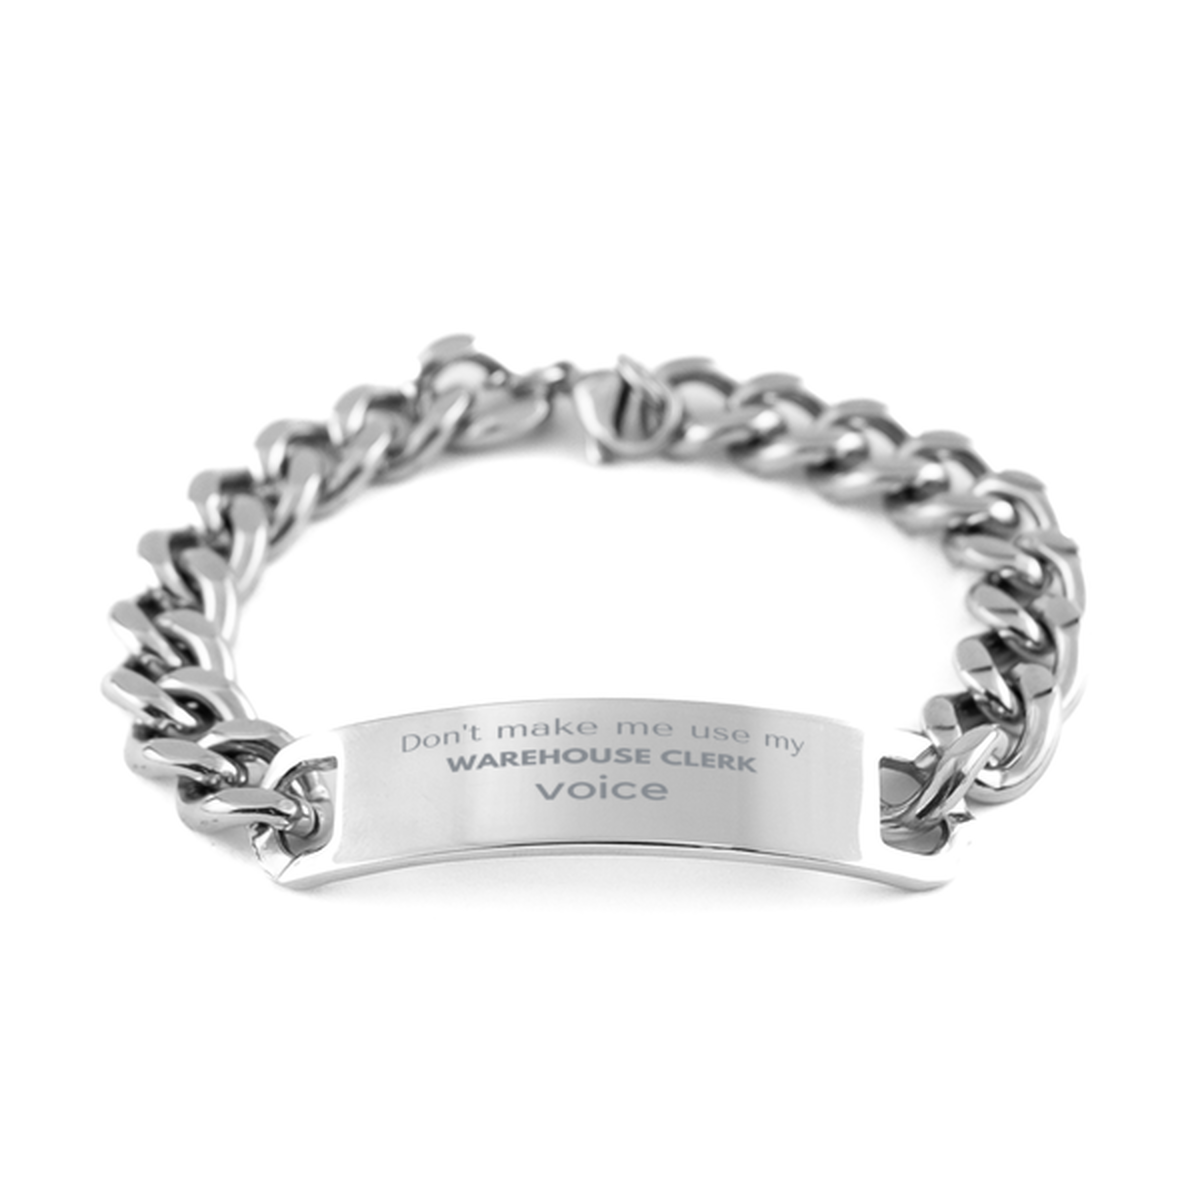 Don't make me use my Warehouse Clerk voice, Sarcasm Warehouse Clerk Gifts, Christmas Warehouse Clerk Cuban Chain Stainless Steel Bracelet Birthday Unique Gifts For Warehouse Clerk Coworkers, Men, Women, Colleague, Friends